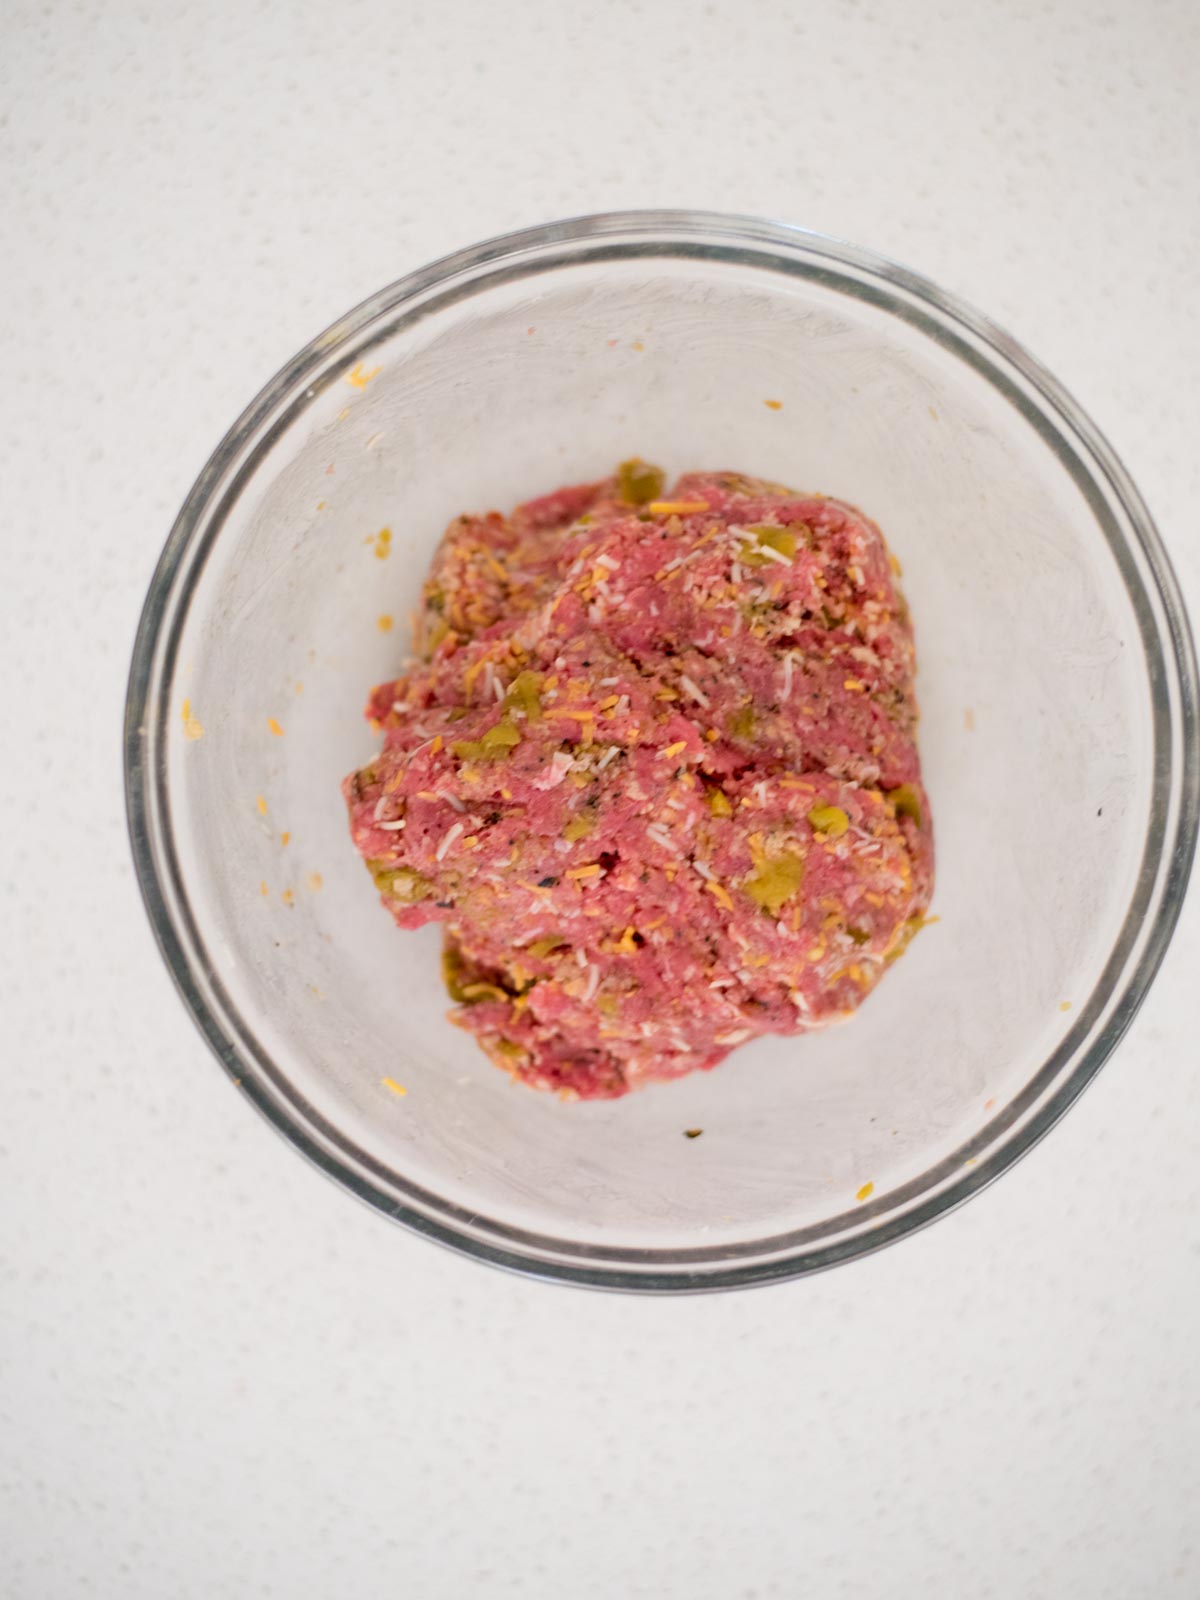 ingredients for smoked burgers mixed together in a bowl